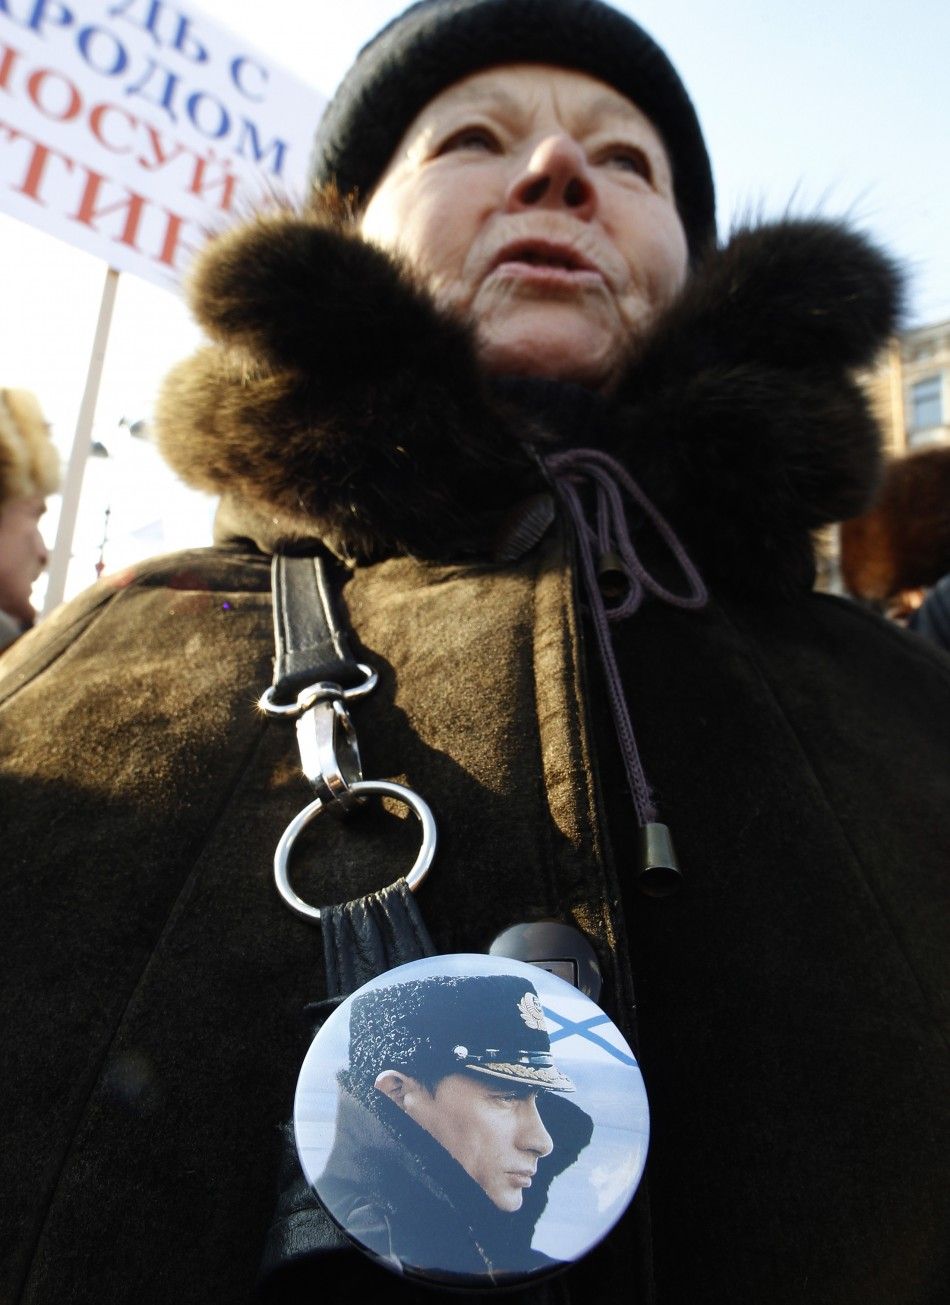 A woman wearing a badge with a portrait of Russian Prime Minister Vladimir Putin attends a rally in support of his presidential candidacy in St.Petersburg, Feb. 18, 2012.